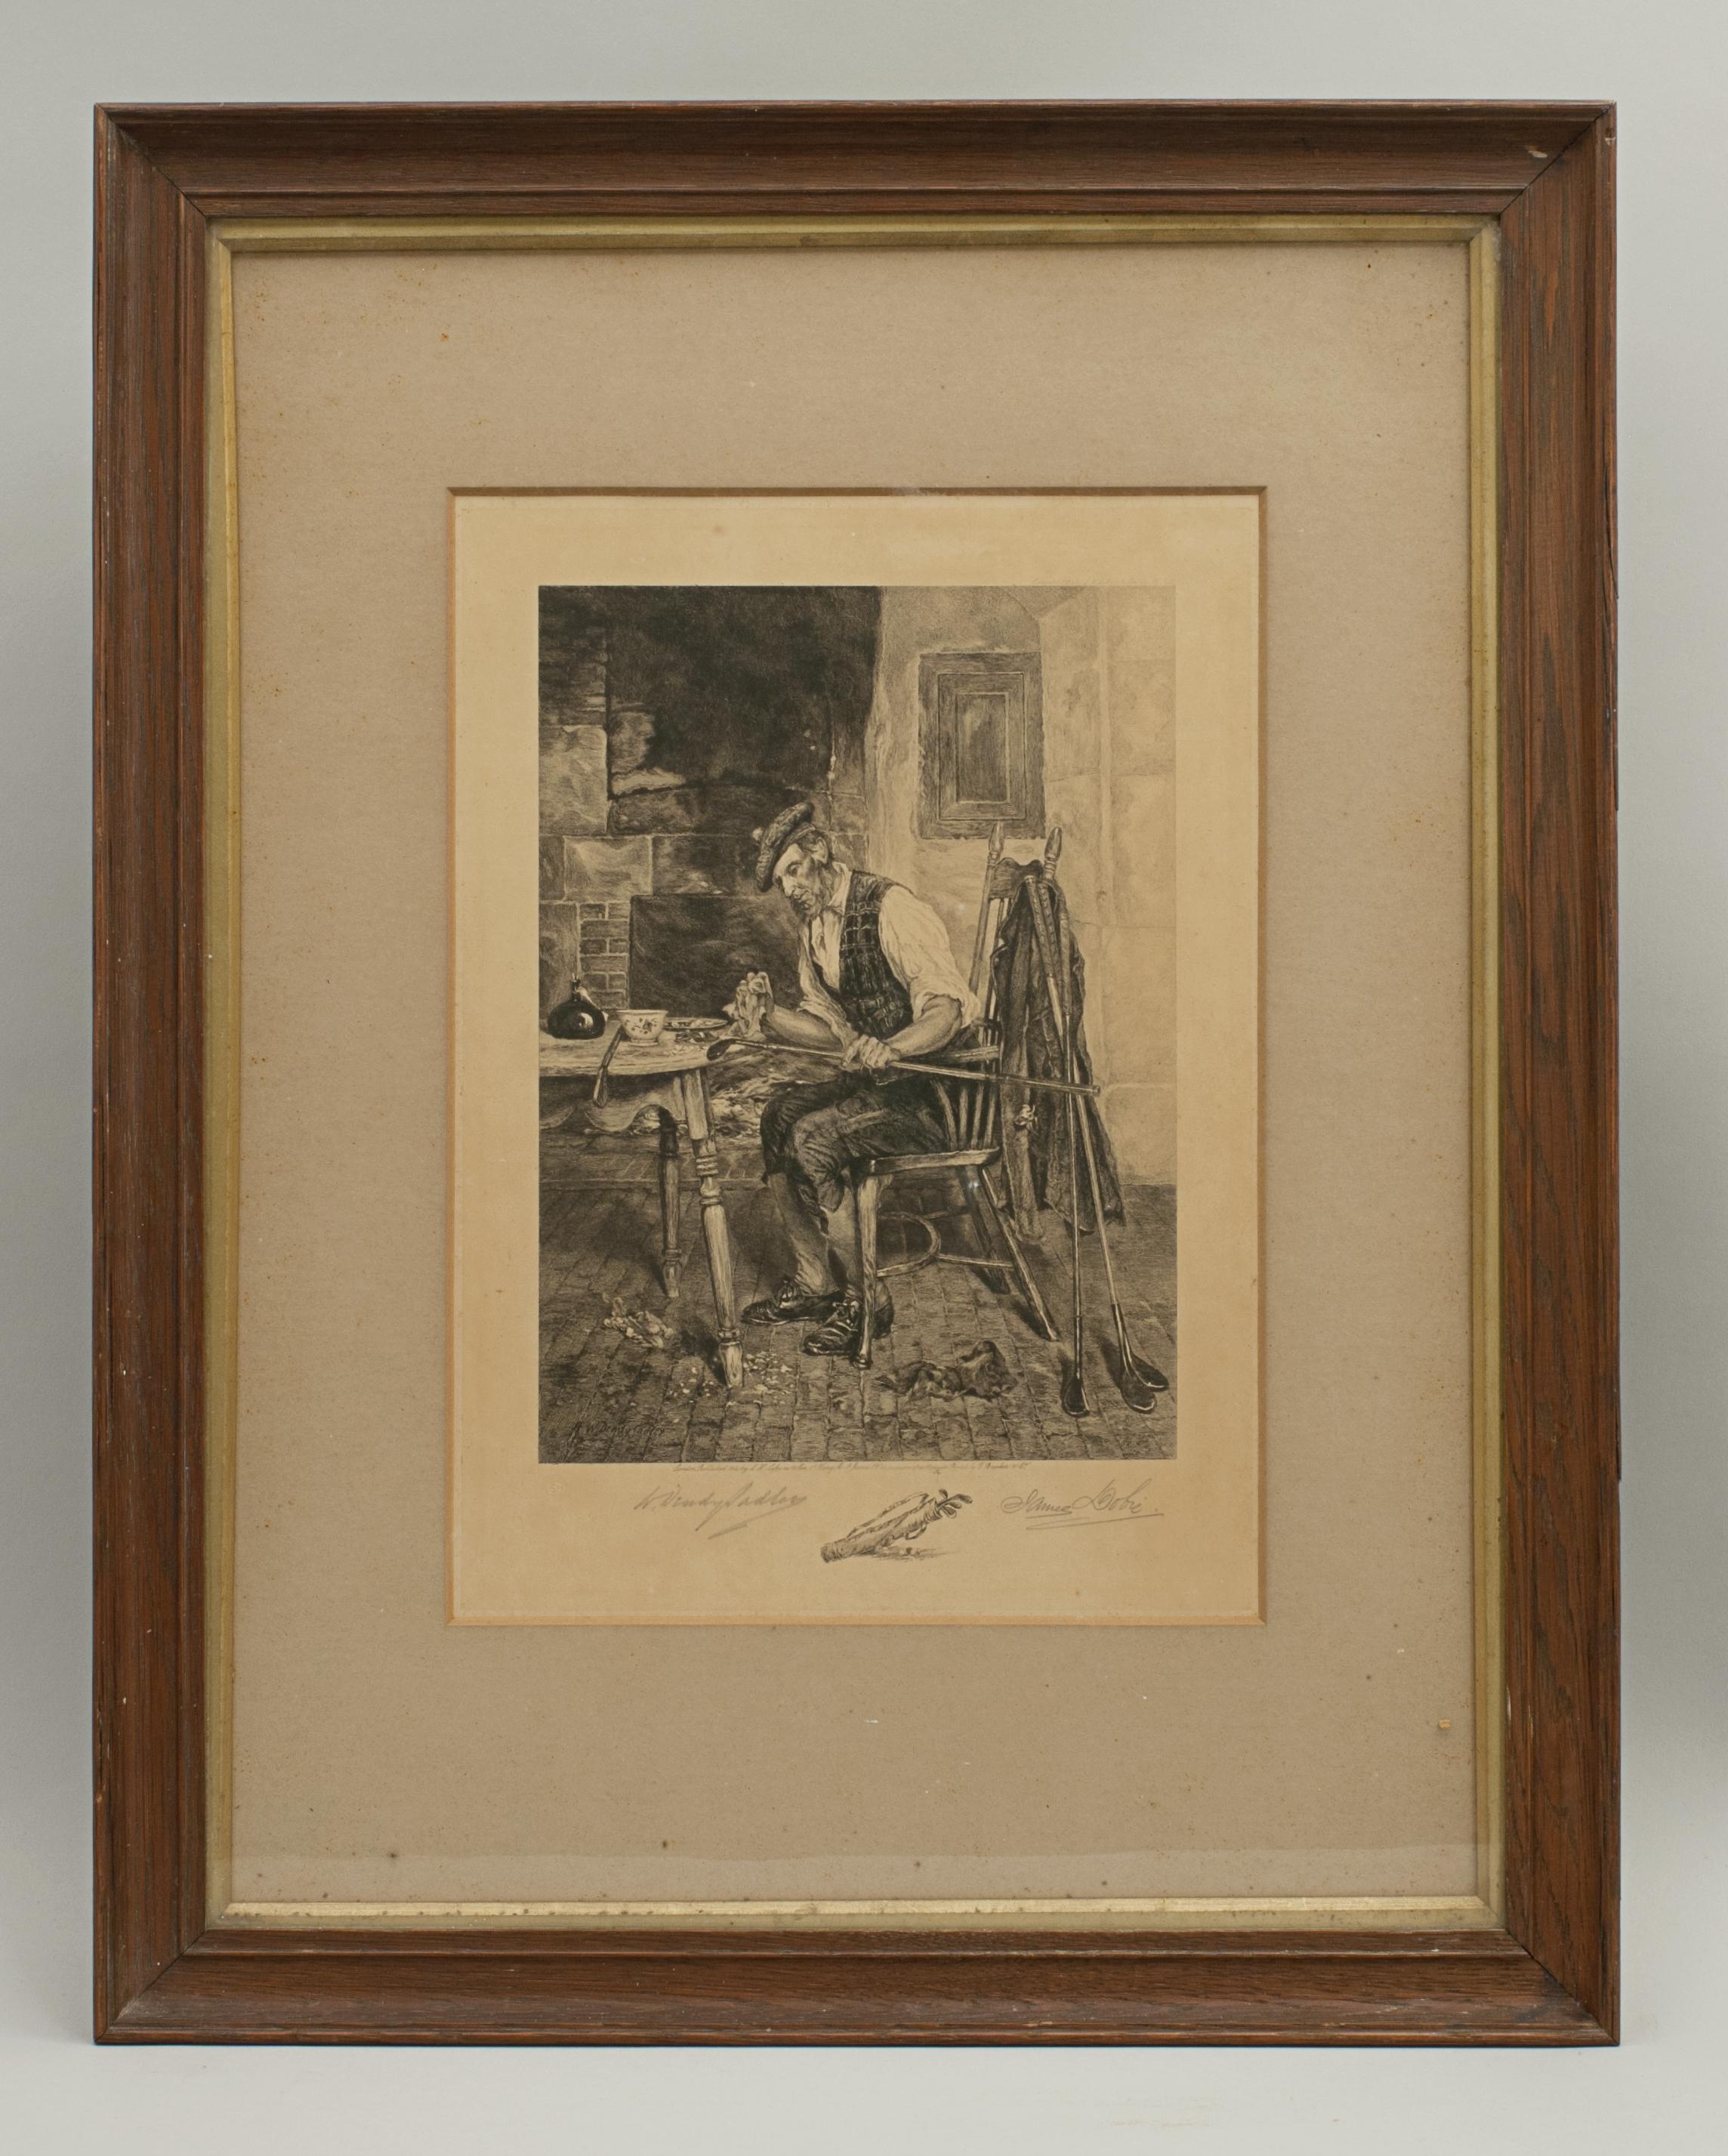 Golf print 'The Royal and Ancient' after Dendy Sadler.
A good oak framed artist proof golf etching by James Dobie after the painting by Dendy Sadler. The picture depicts a Scottish gentleman at his kitchen table cleaning some golf clubs, amongst